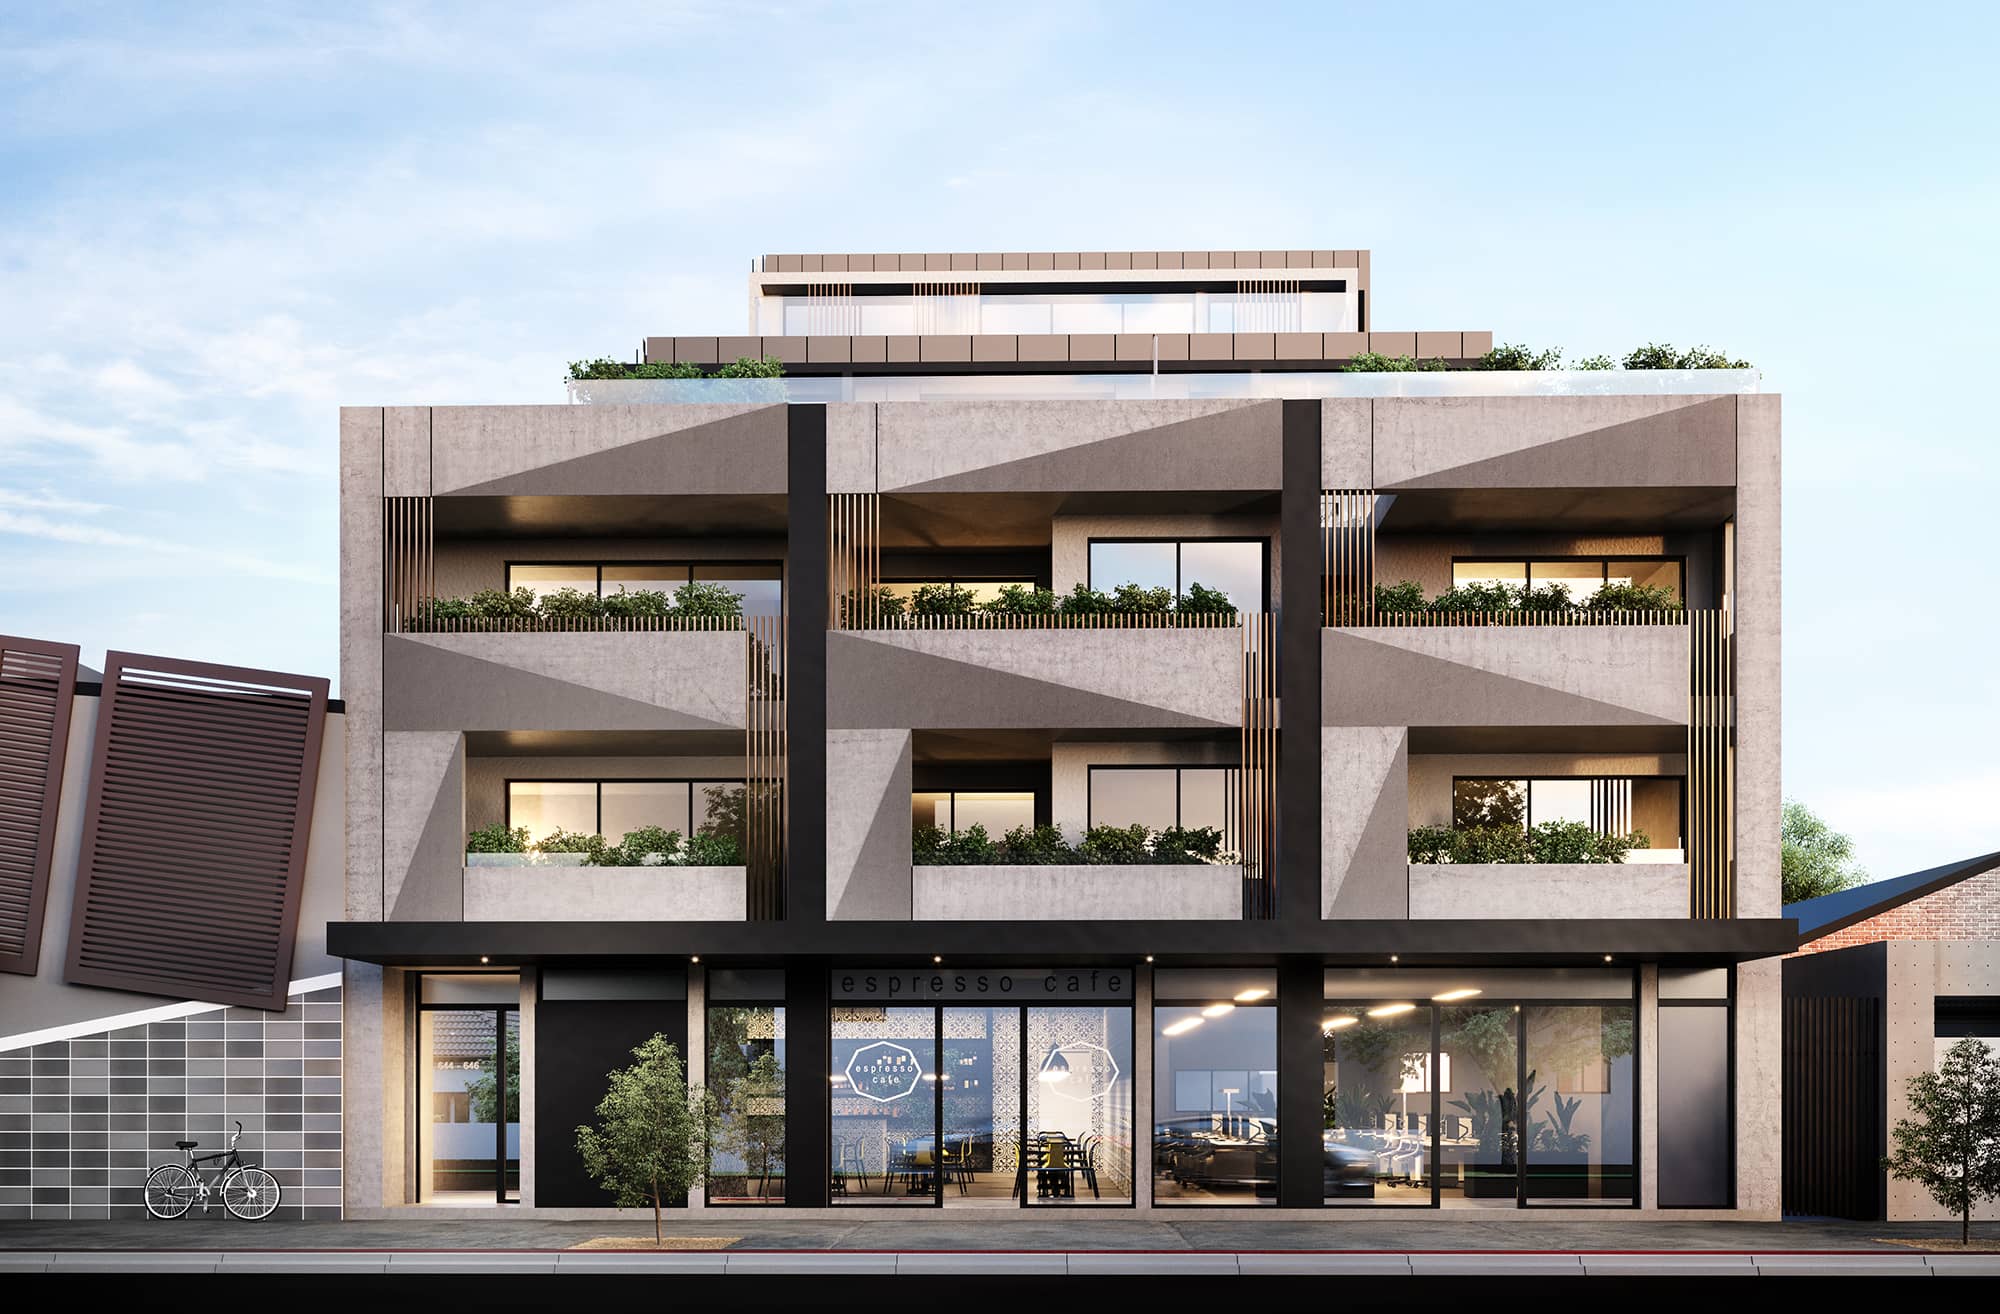 Caulfield South - Residential Apartments, Retail